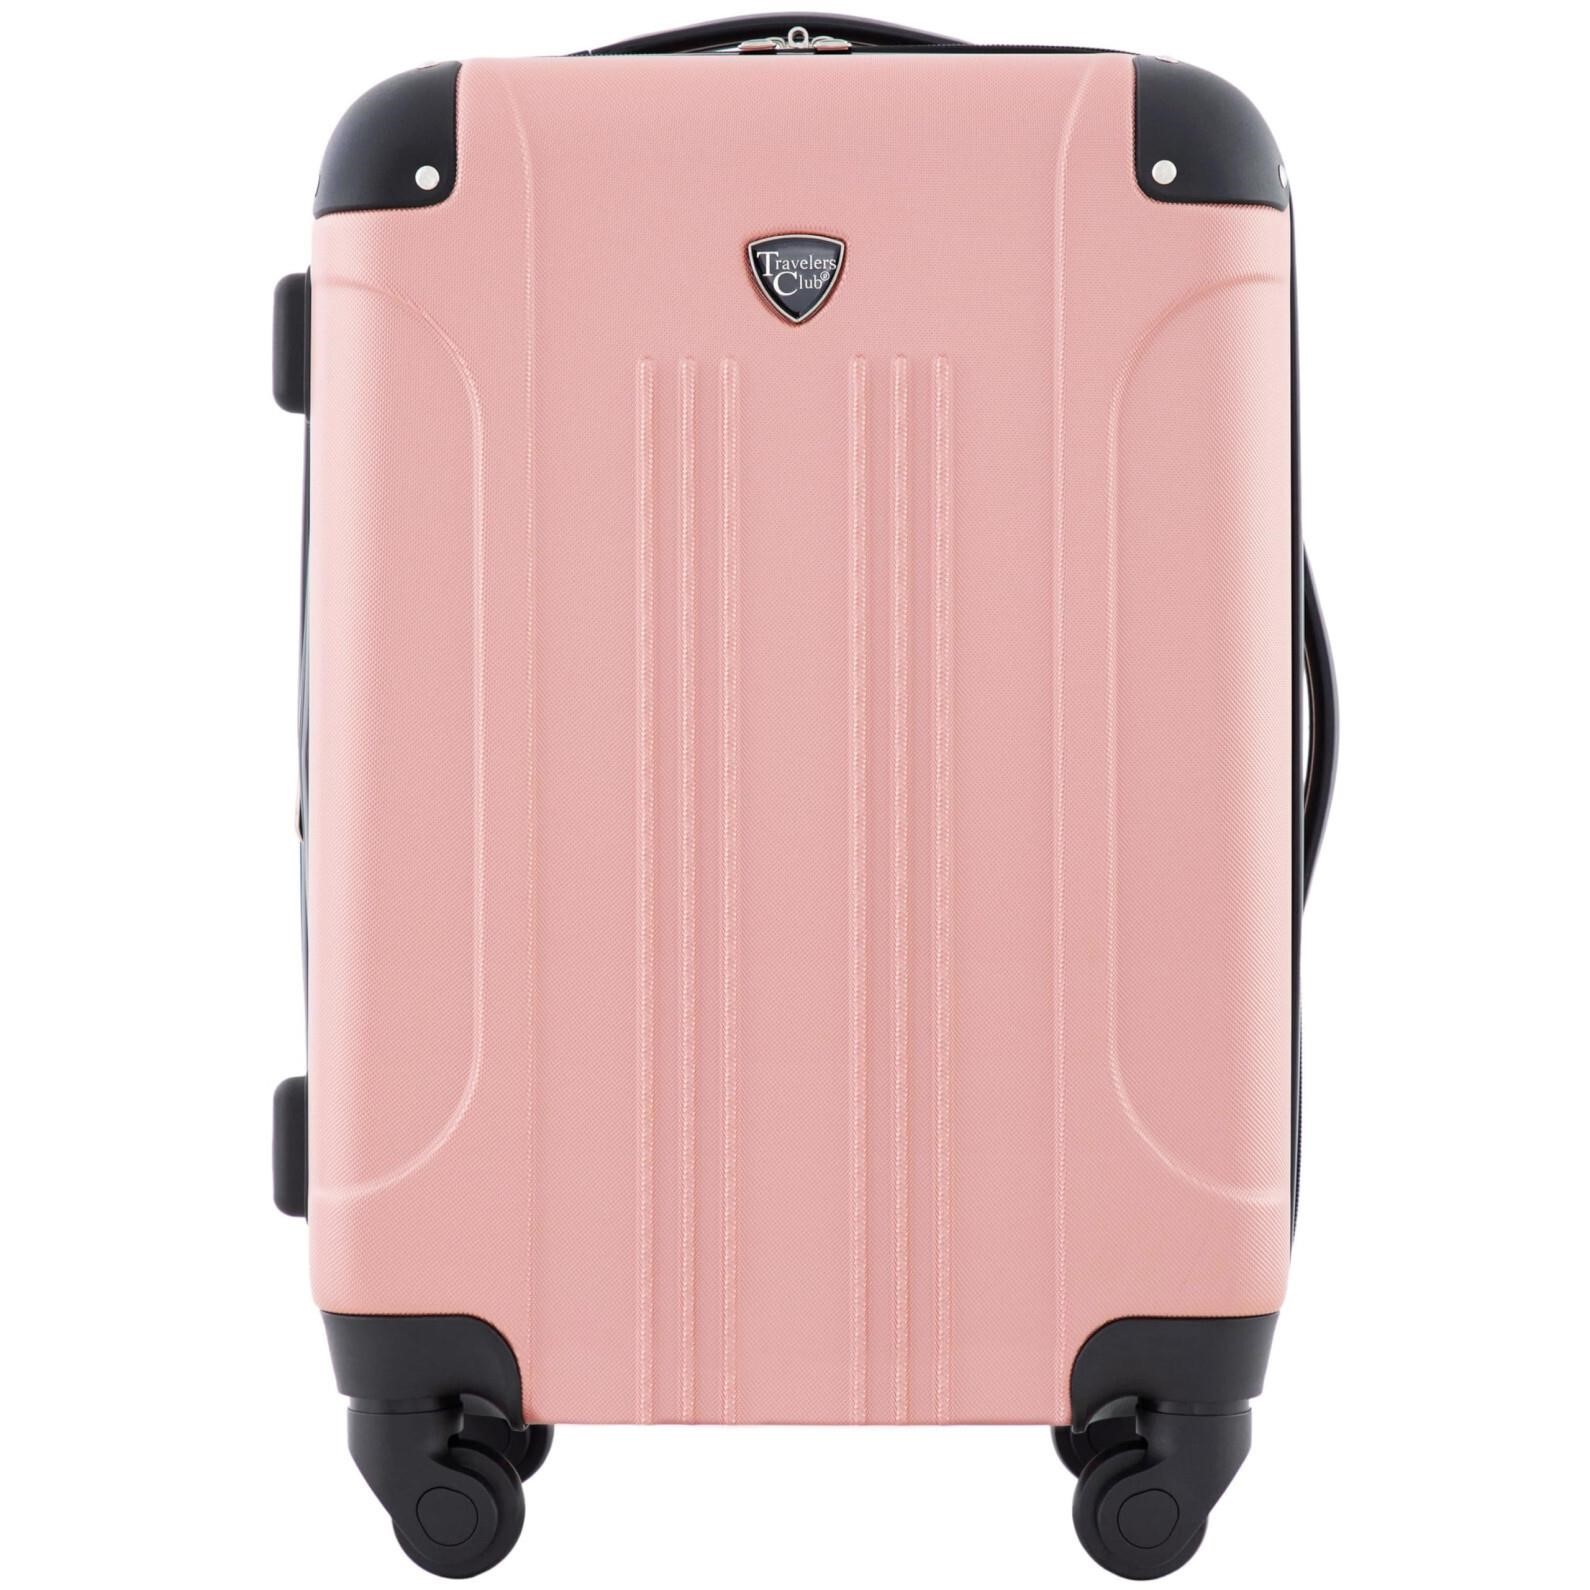 Travelers Club Chicago Hardside Expandable Spinner